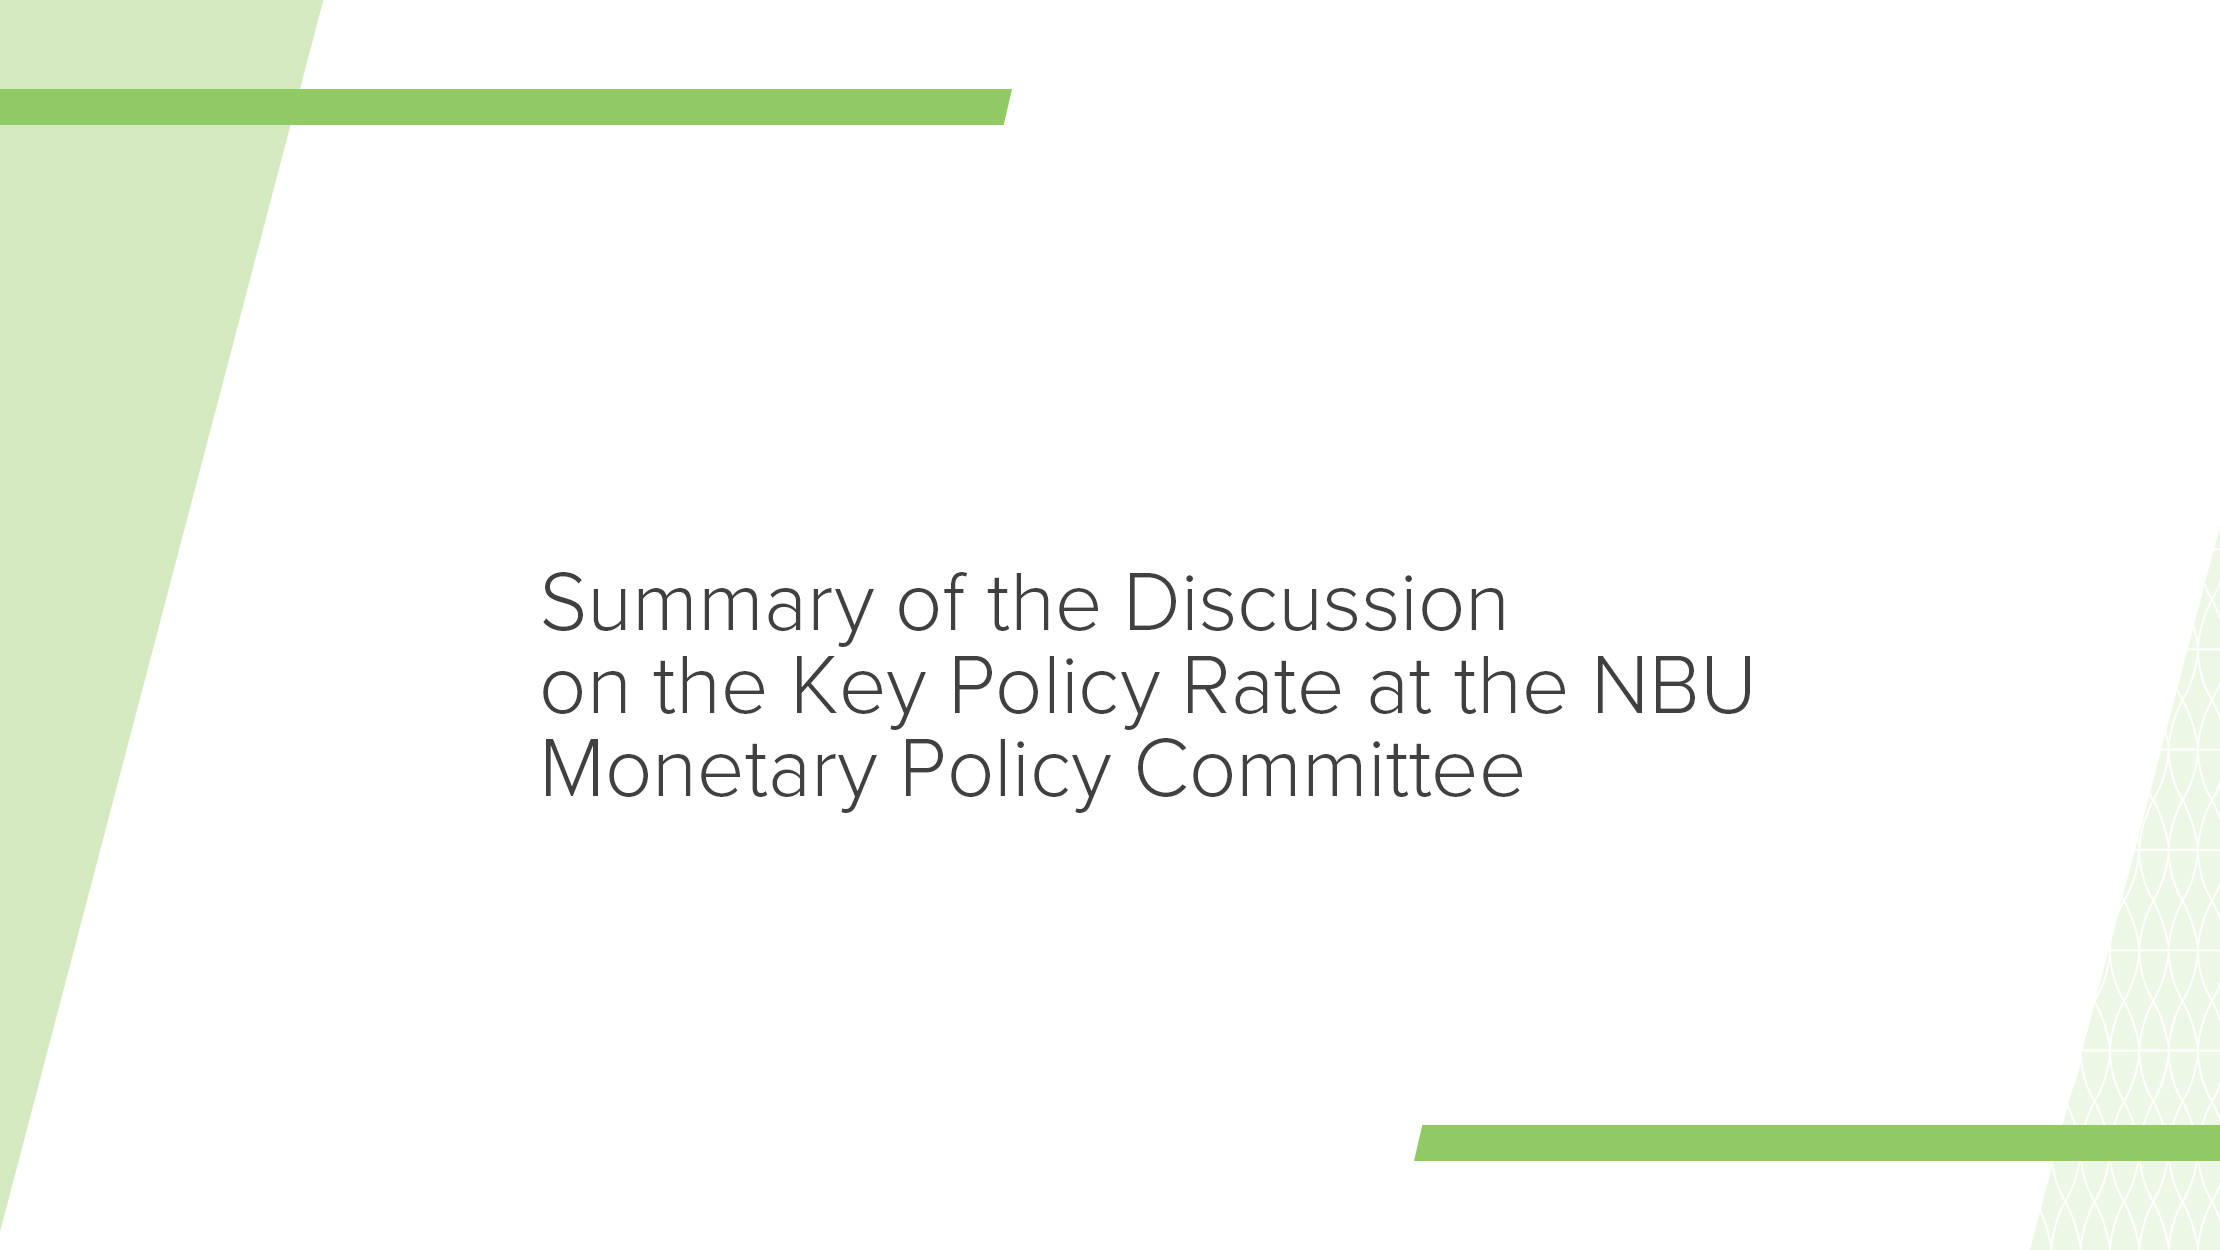 Summary of the Discussion on the Key Policy Rate at the NBU Monetary Policy Committee 11 July 2018